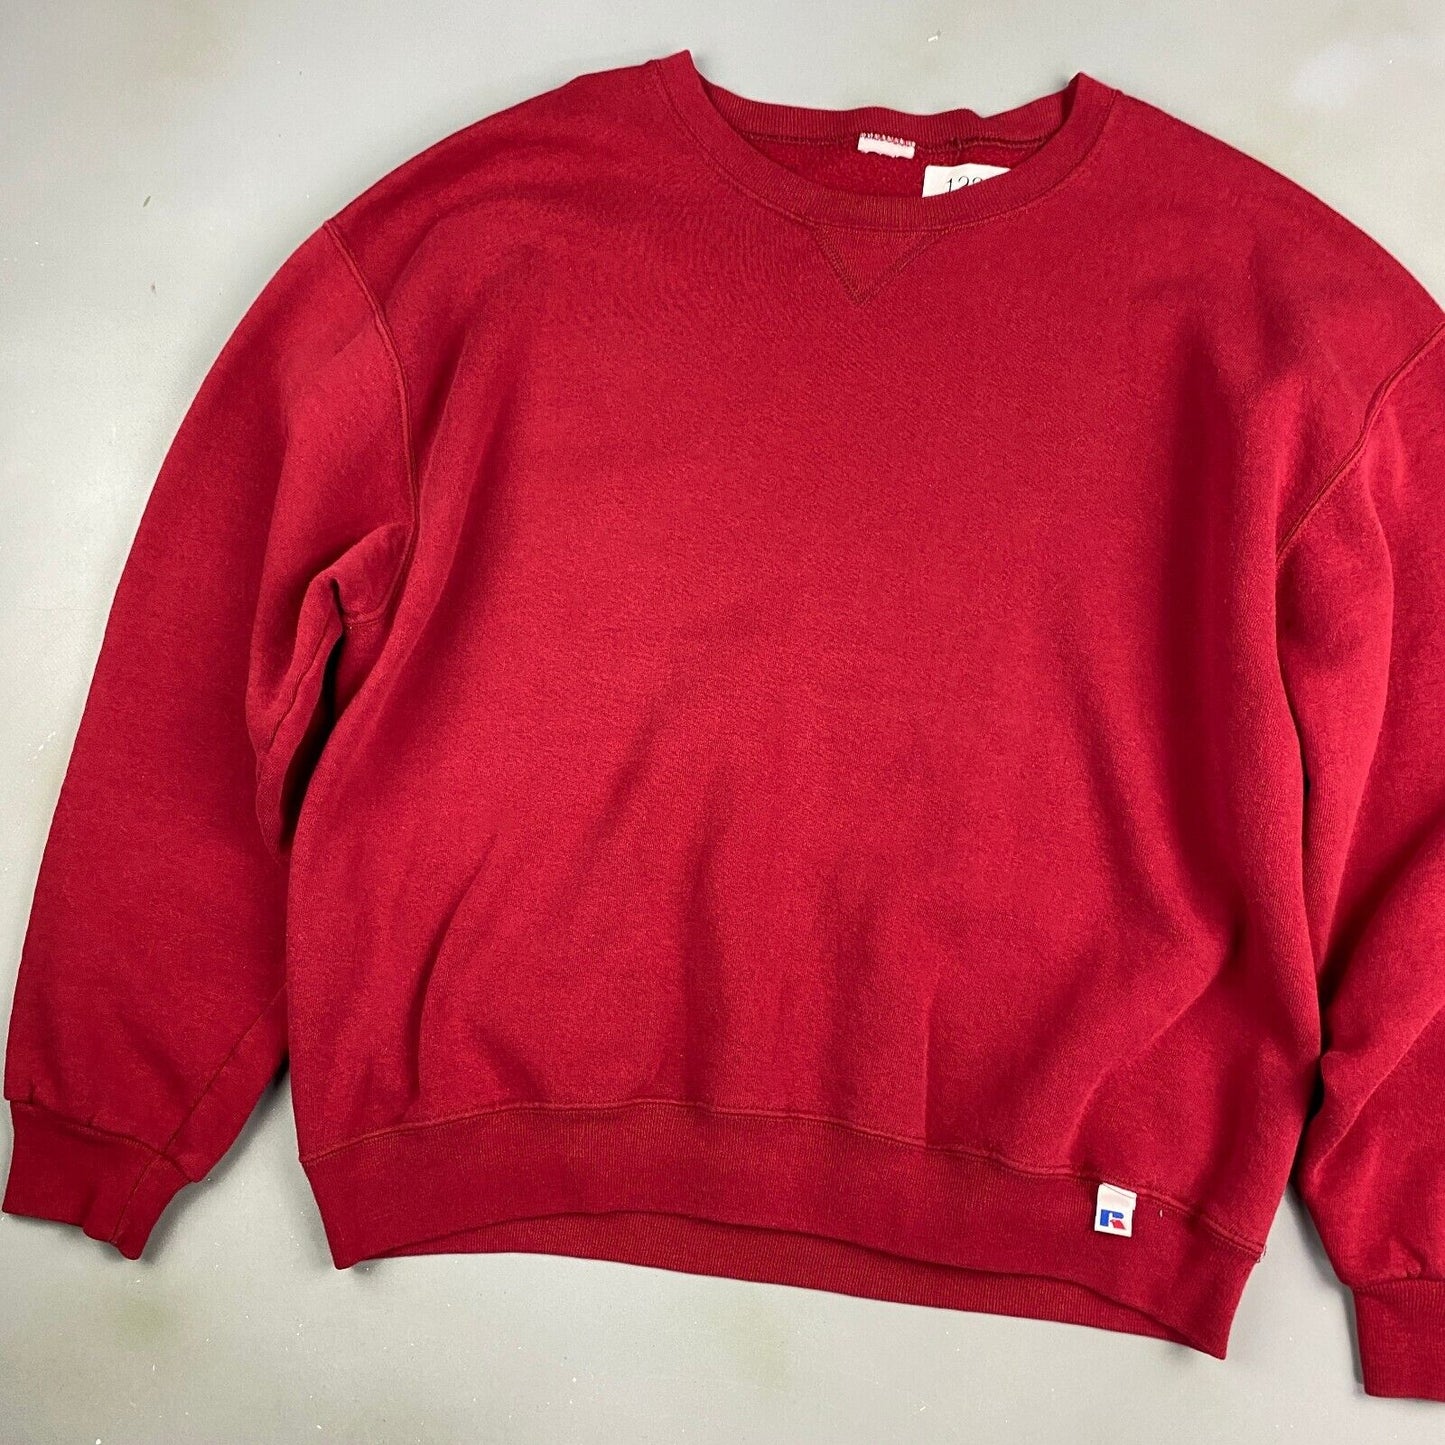 VINTAGE Russell Athletic Blank Red Crewneck Sweater sz Large Adult